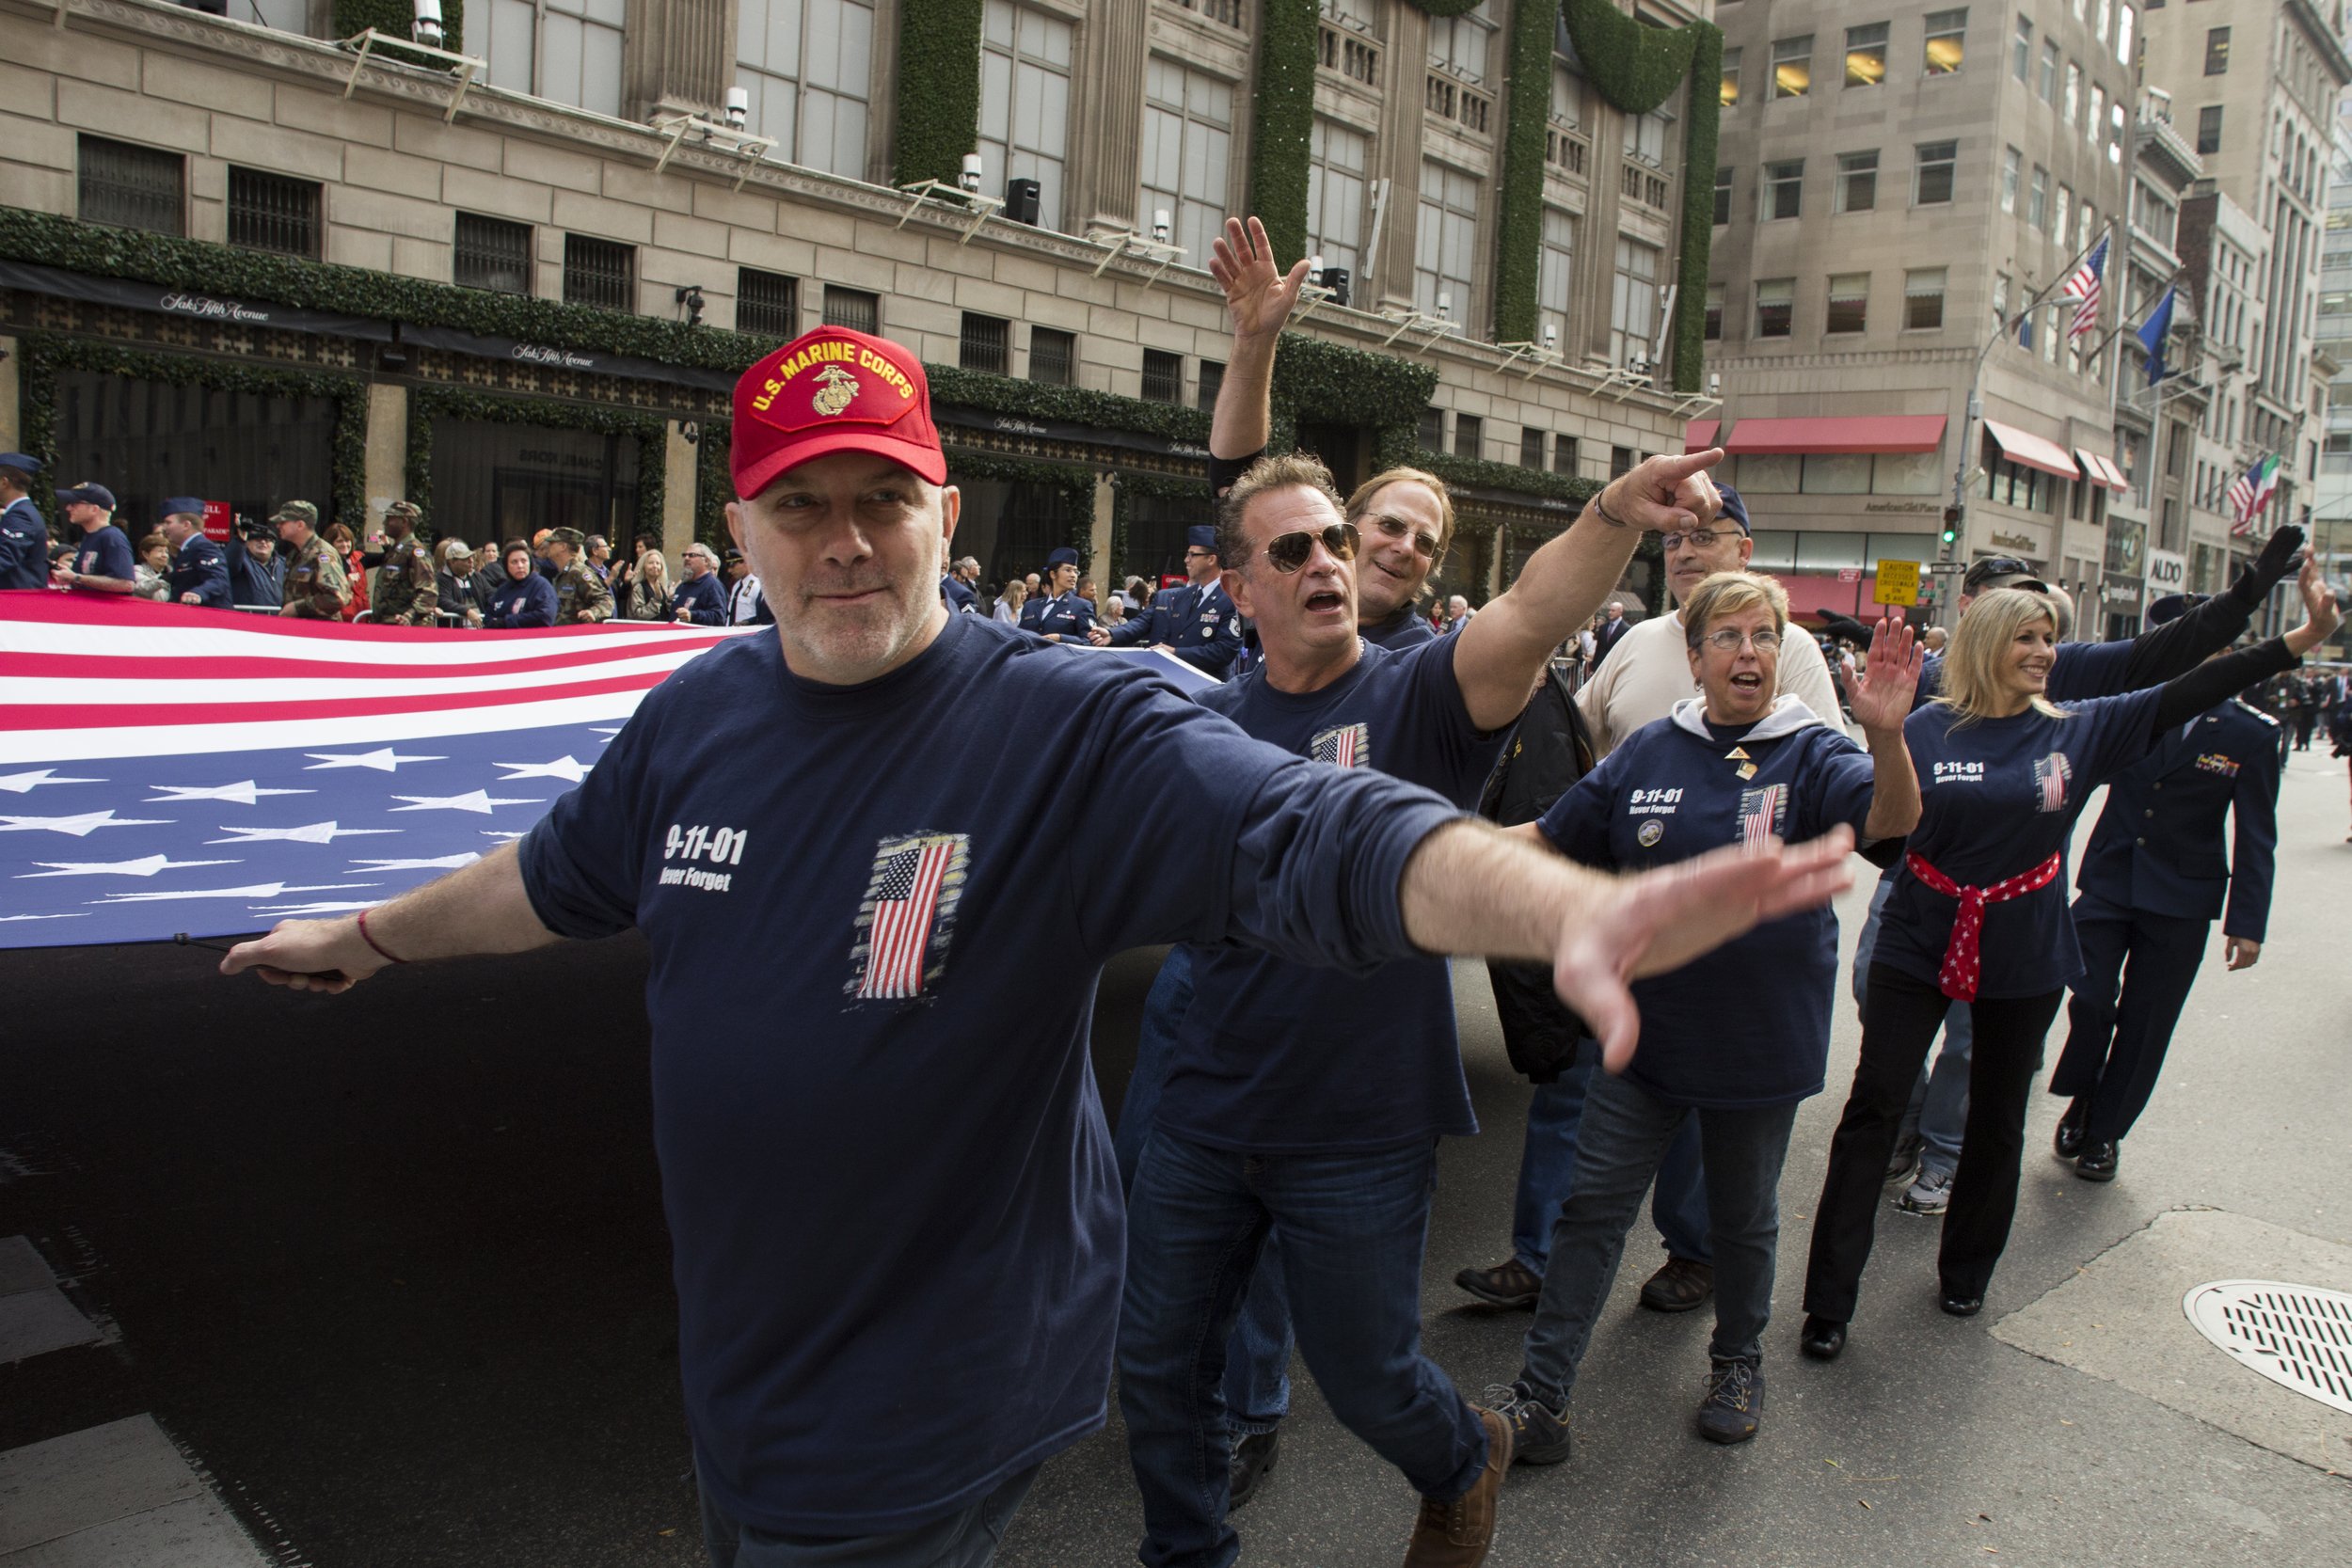  Firefighters carry a large American flag down 5th avenue during the 2015 Veterans' Day parade.&nbsp; 